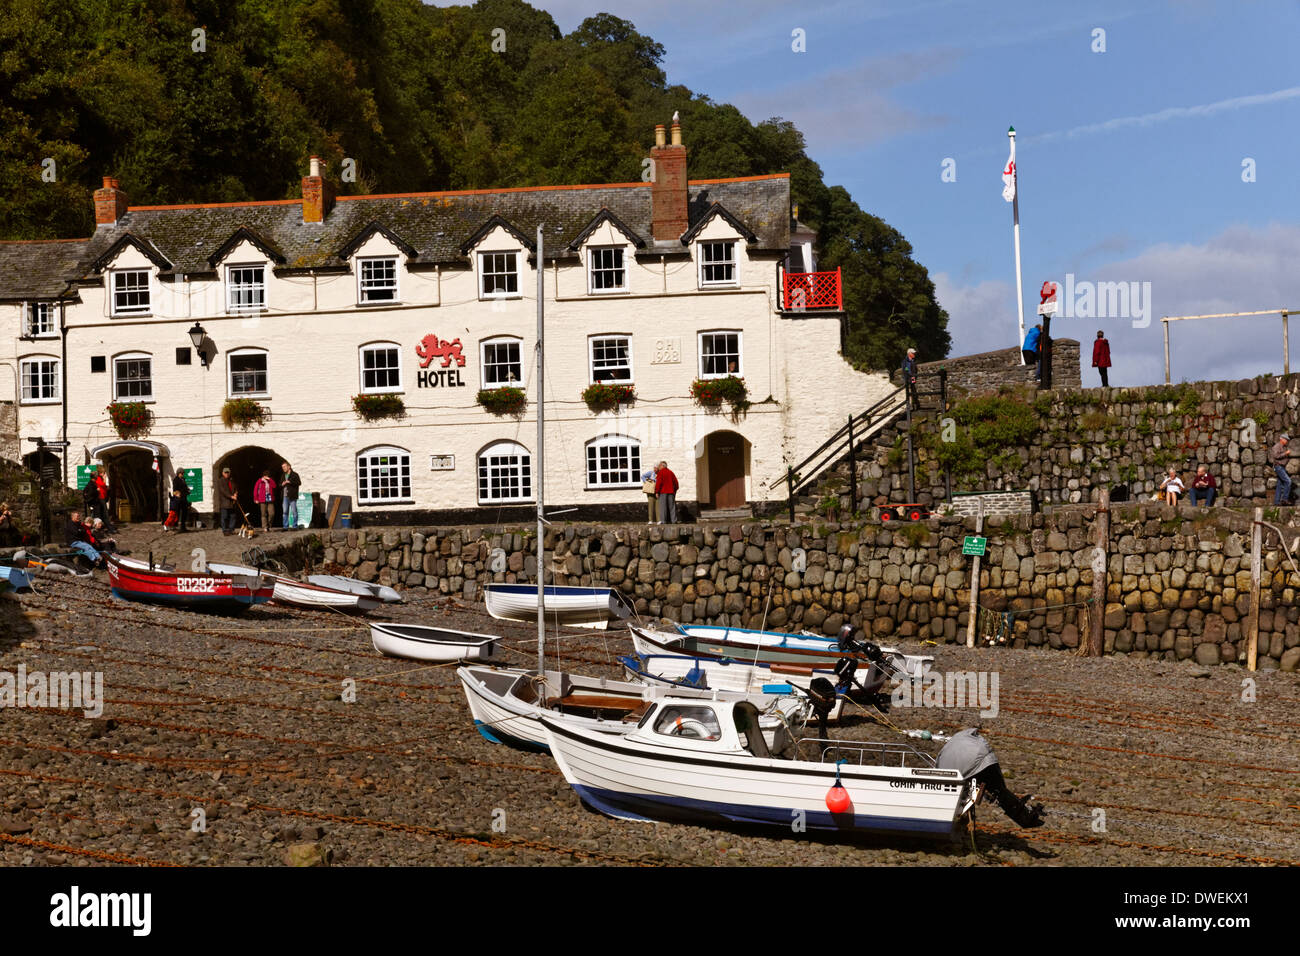 The Red Lion hotel in the village of Clovelly, Devon, England Stock Photo